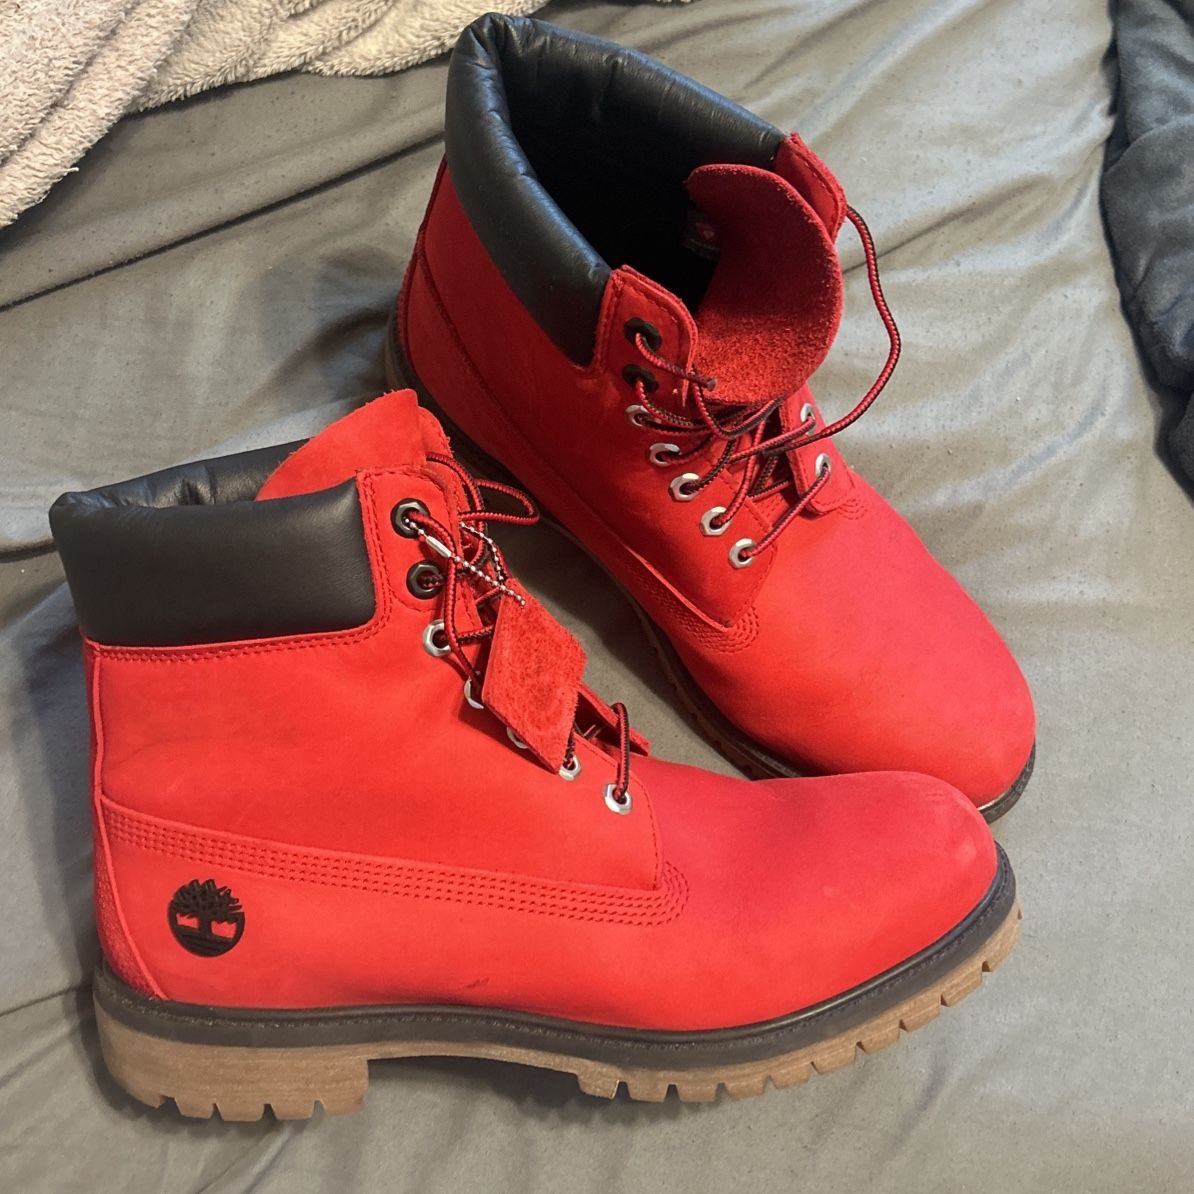 Size 11 Timberland Boot Red And Black Worn Once To Be 